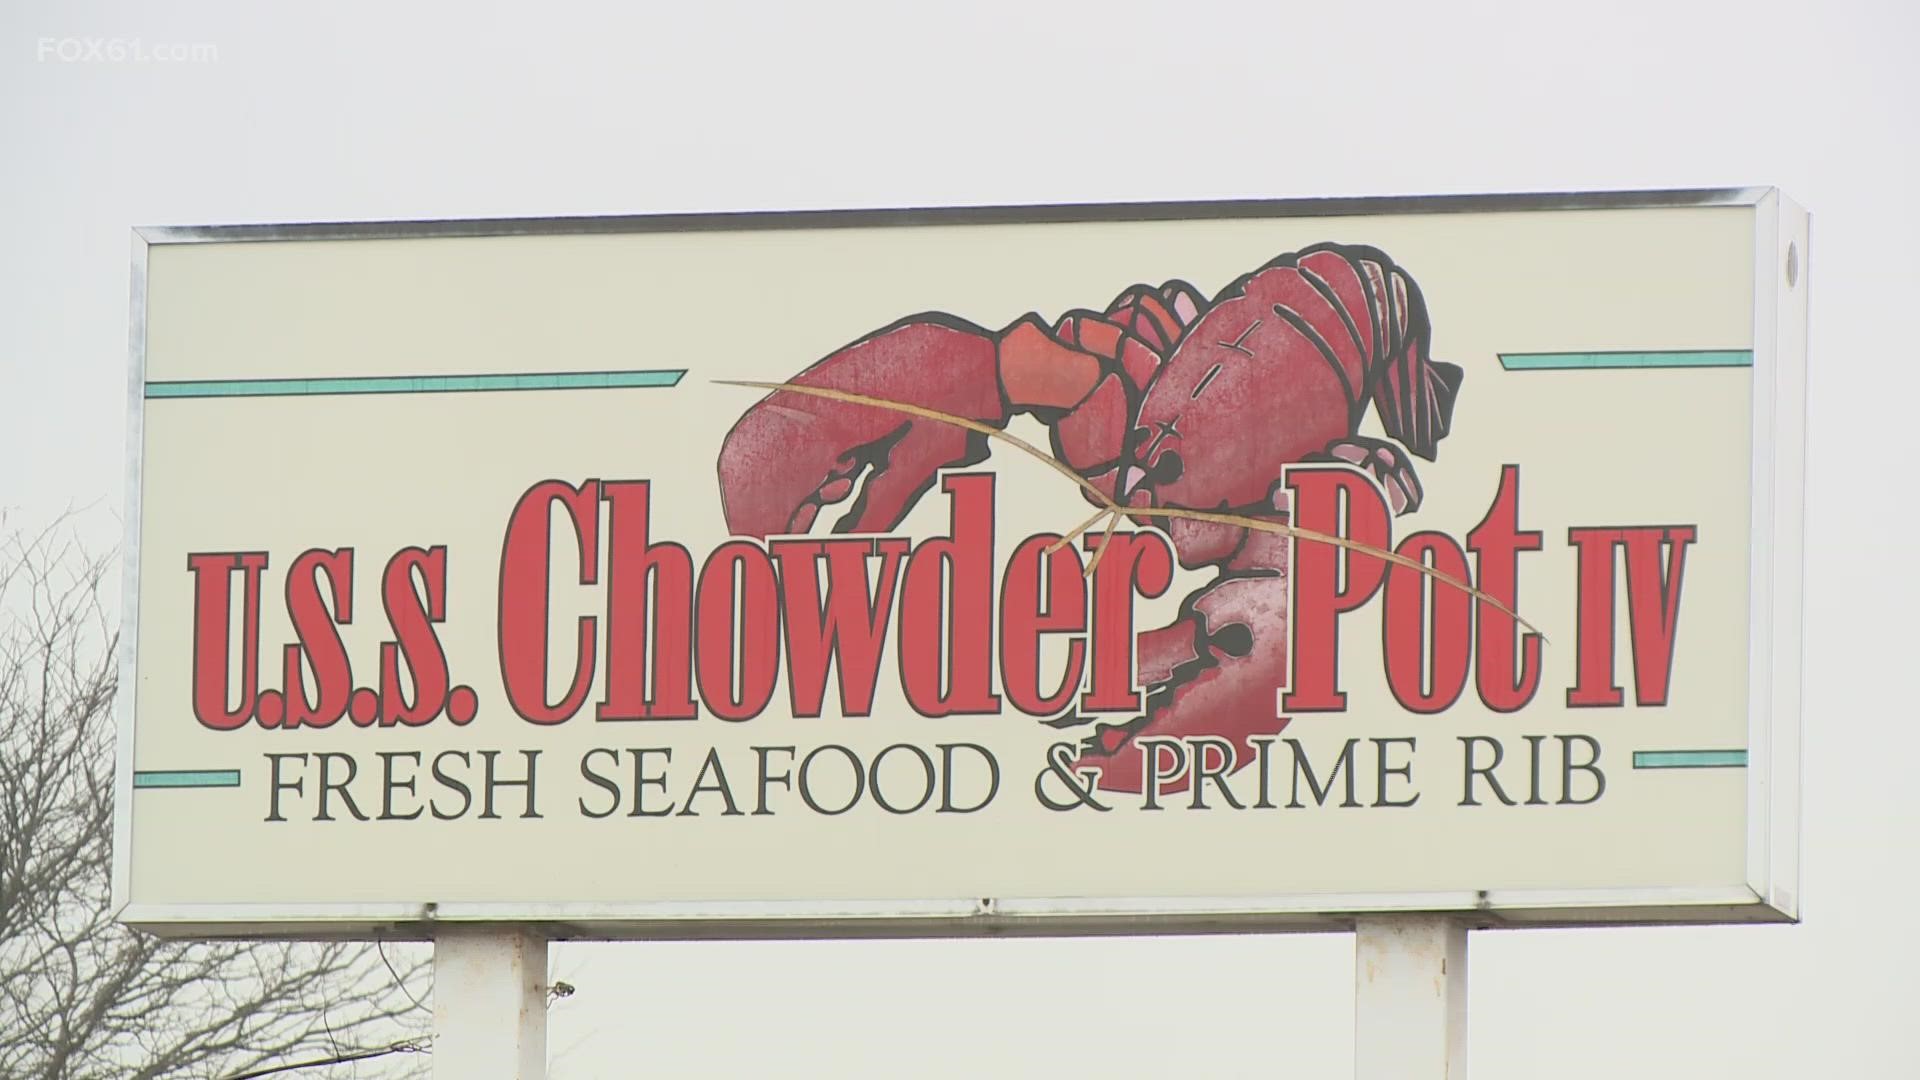 The Chowder Pot of Hartford will be serving the last of its guests after almost 30 years in business on Saturday, March 25, 2023.